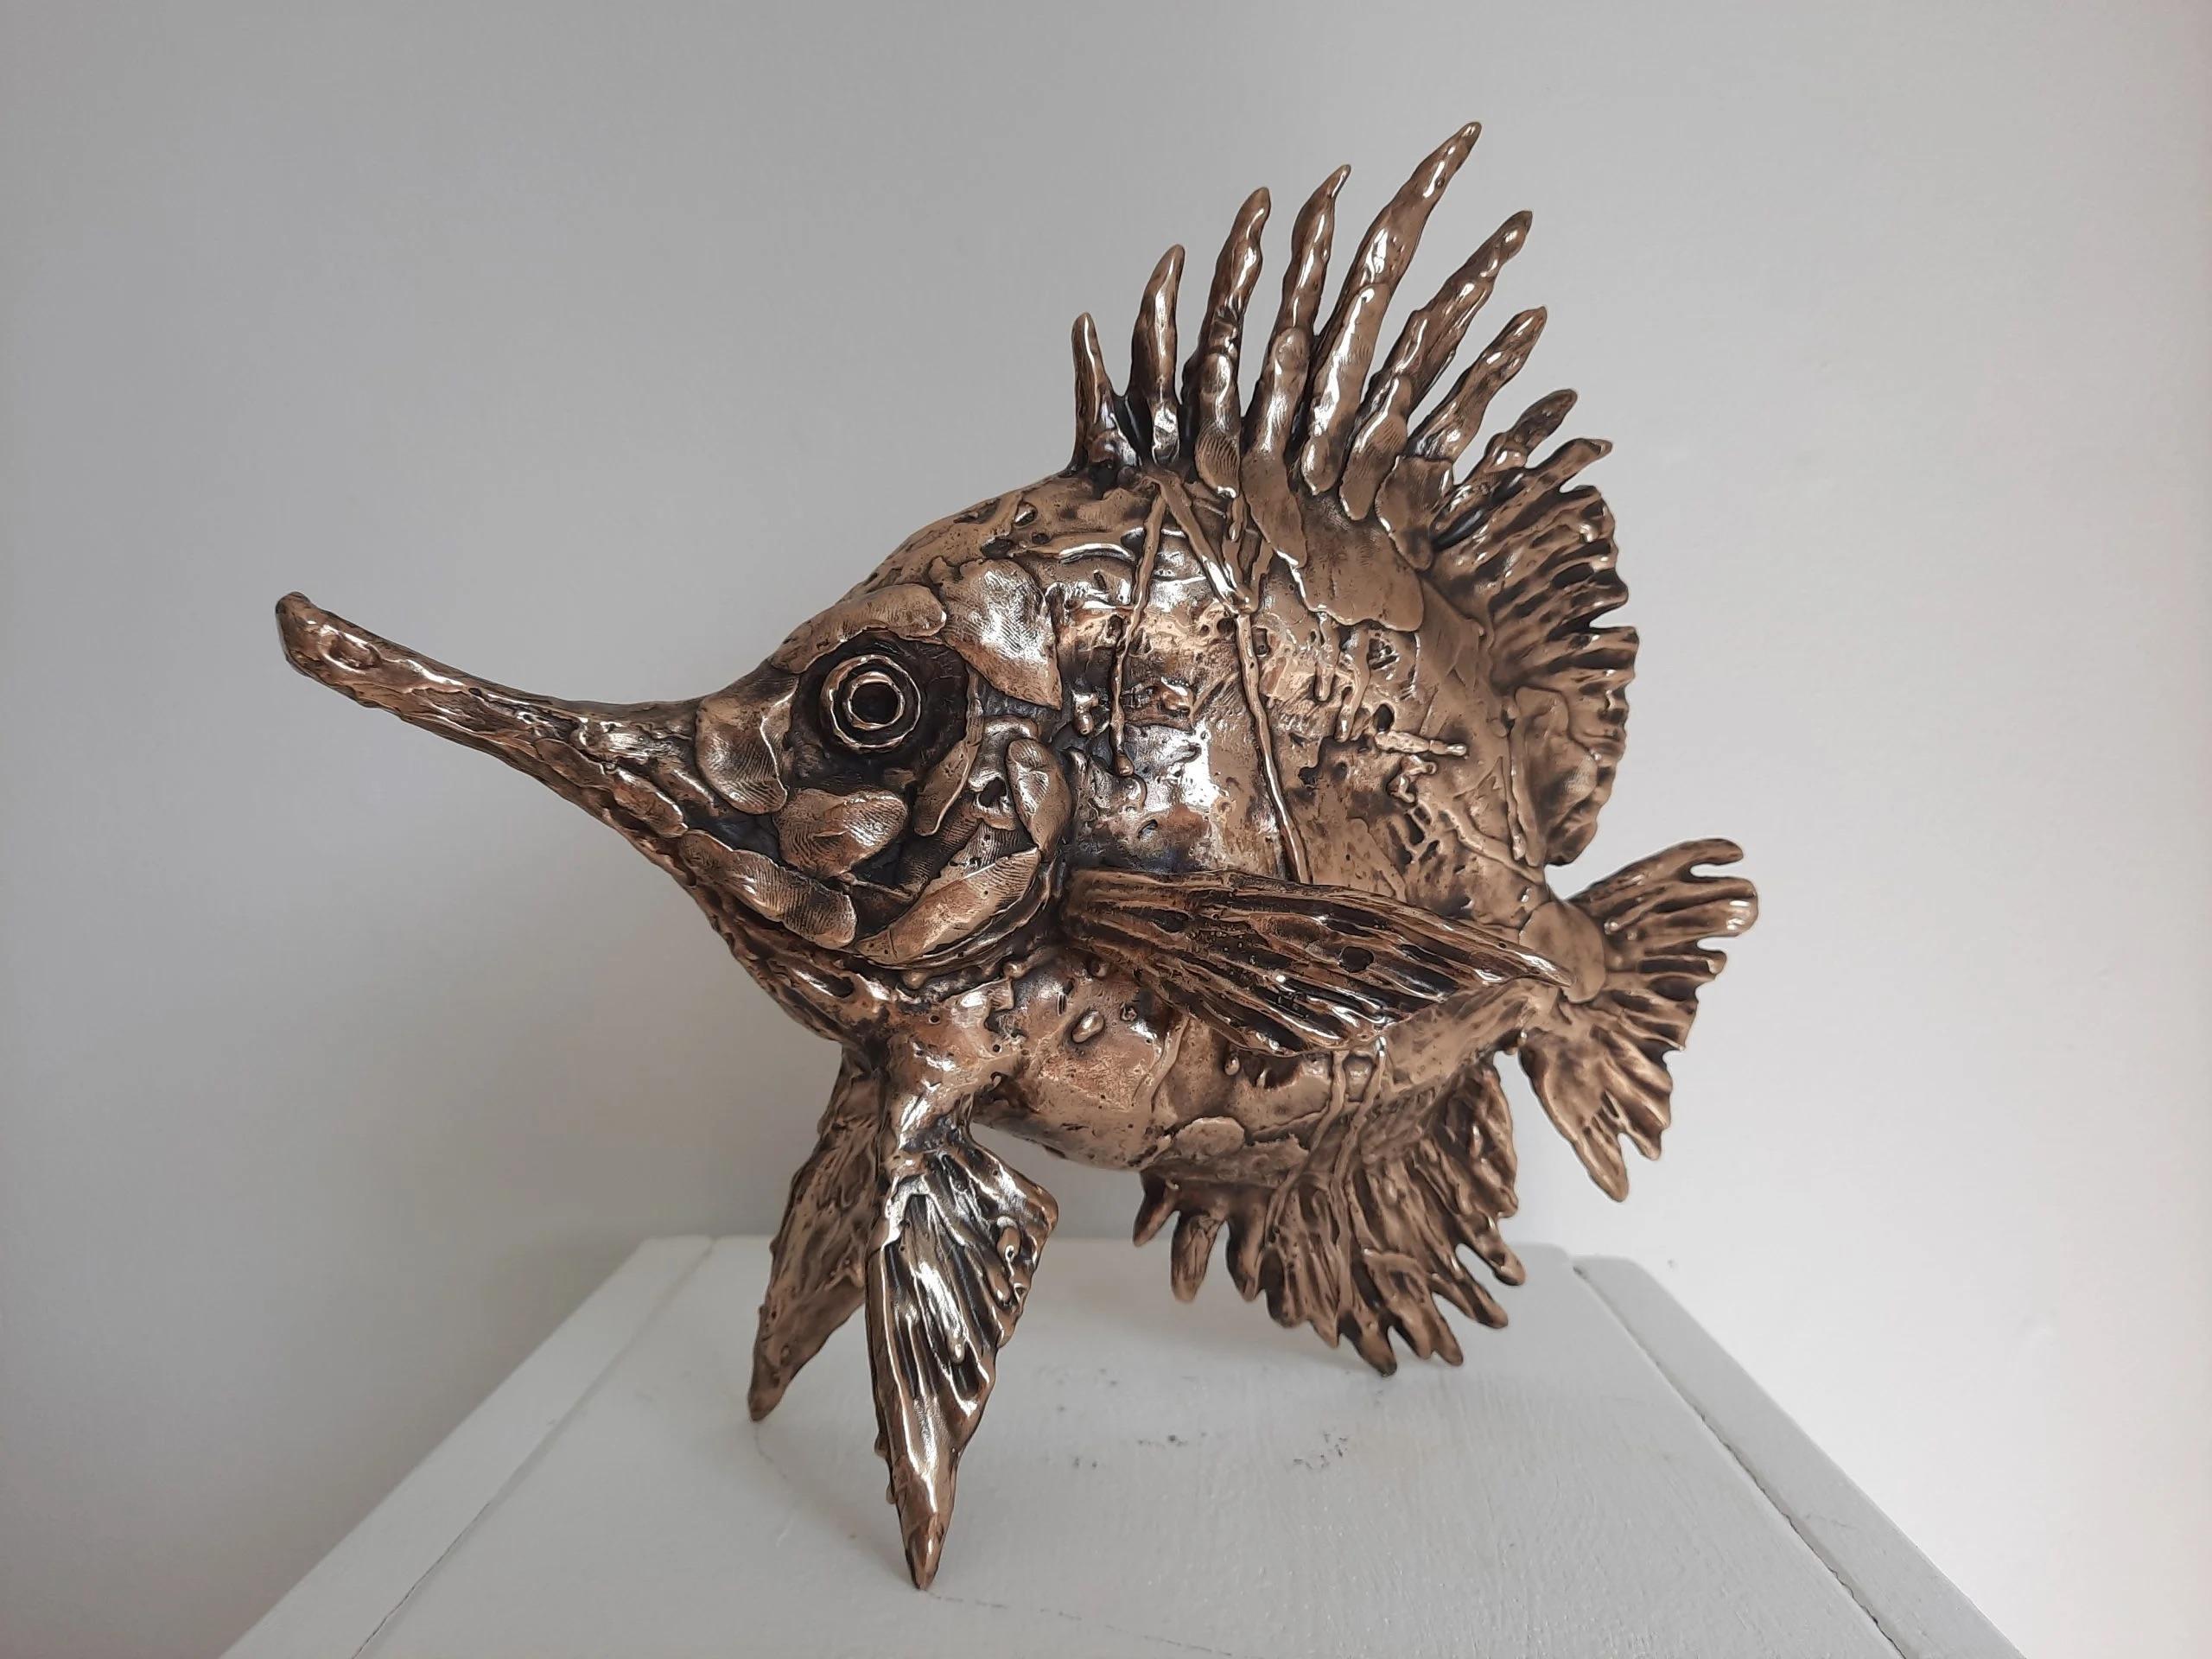 This is a custom order for: 4Sculptures by Andrzej Szymczk
1) Siamese Fighter Fish III,
2) Gold fish 2,
3) Gold fish  3,
 4) Longnose Butterfly Fish,

This contemporary marine sculpture by Andrzej Szymczyk depicts a Coral Fish and is expertly cast